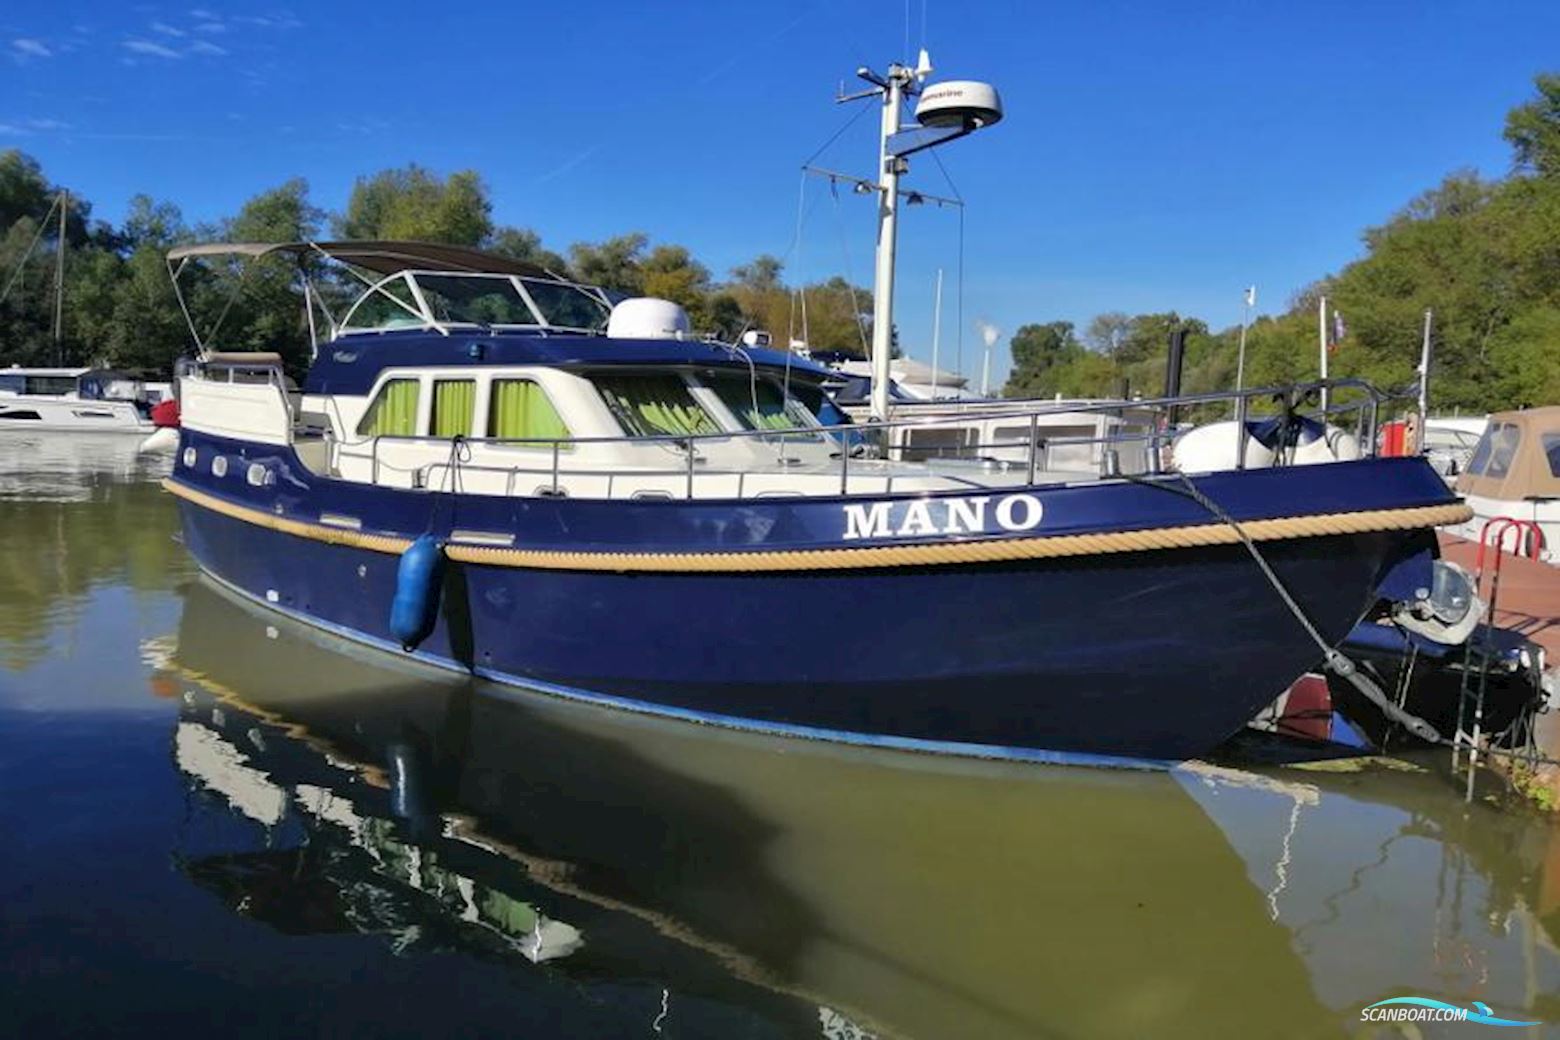 Linssen Grand Sturdy 410 AC Twin Motor boat 2004, with Volvo Penta 100 pk. engine, The Netherlands